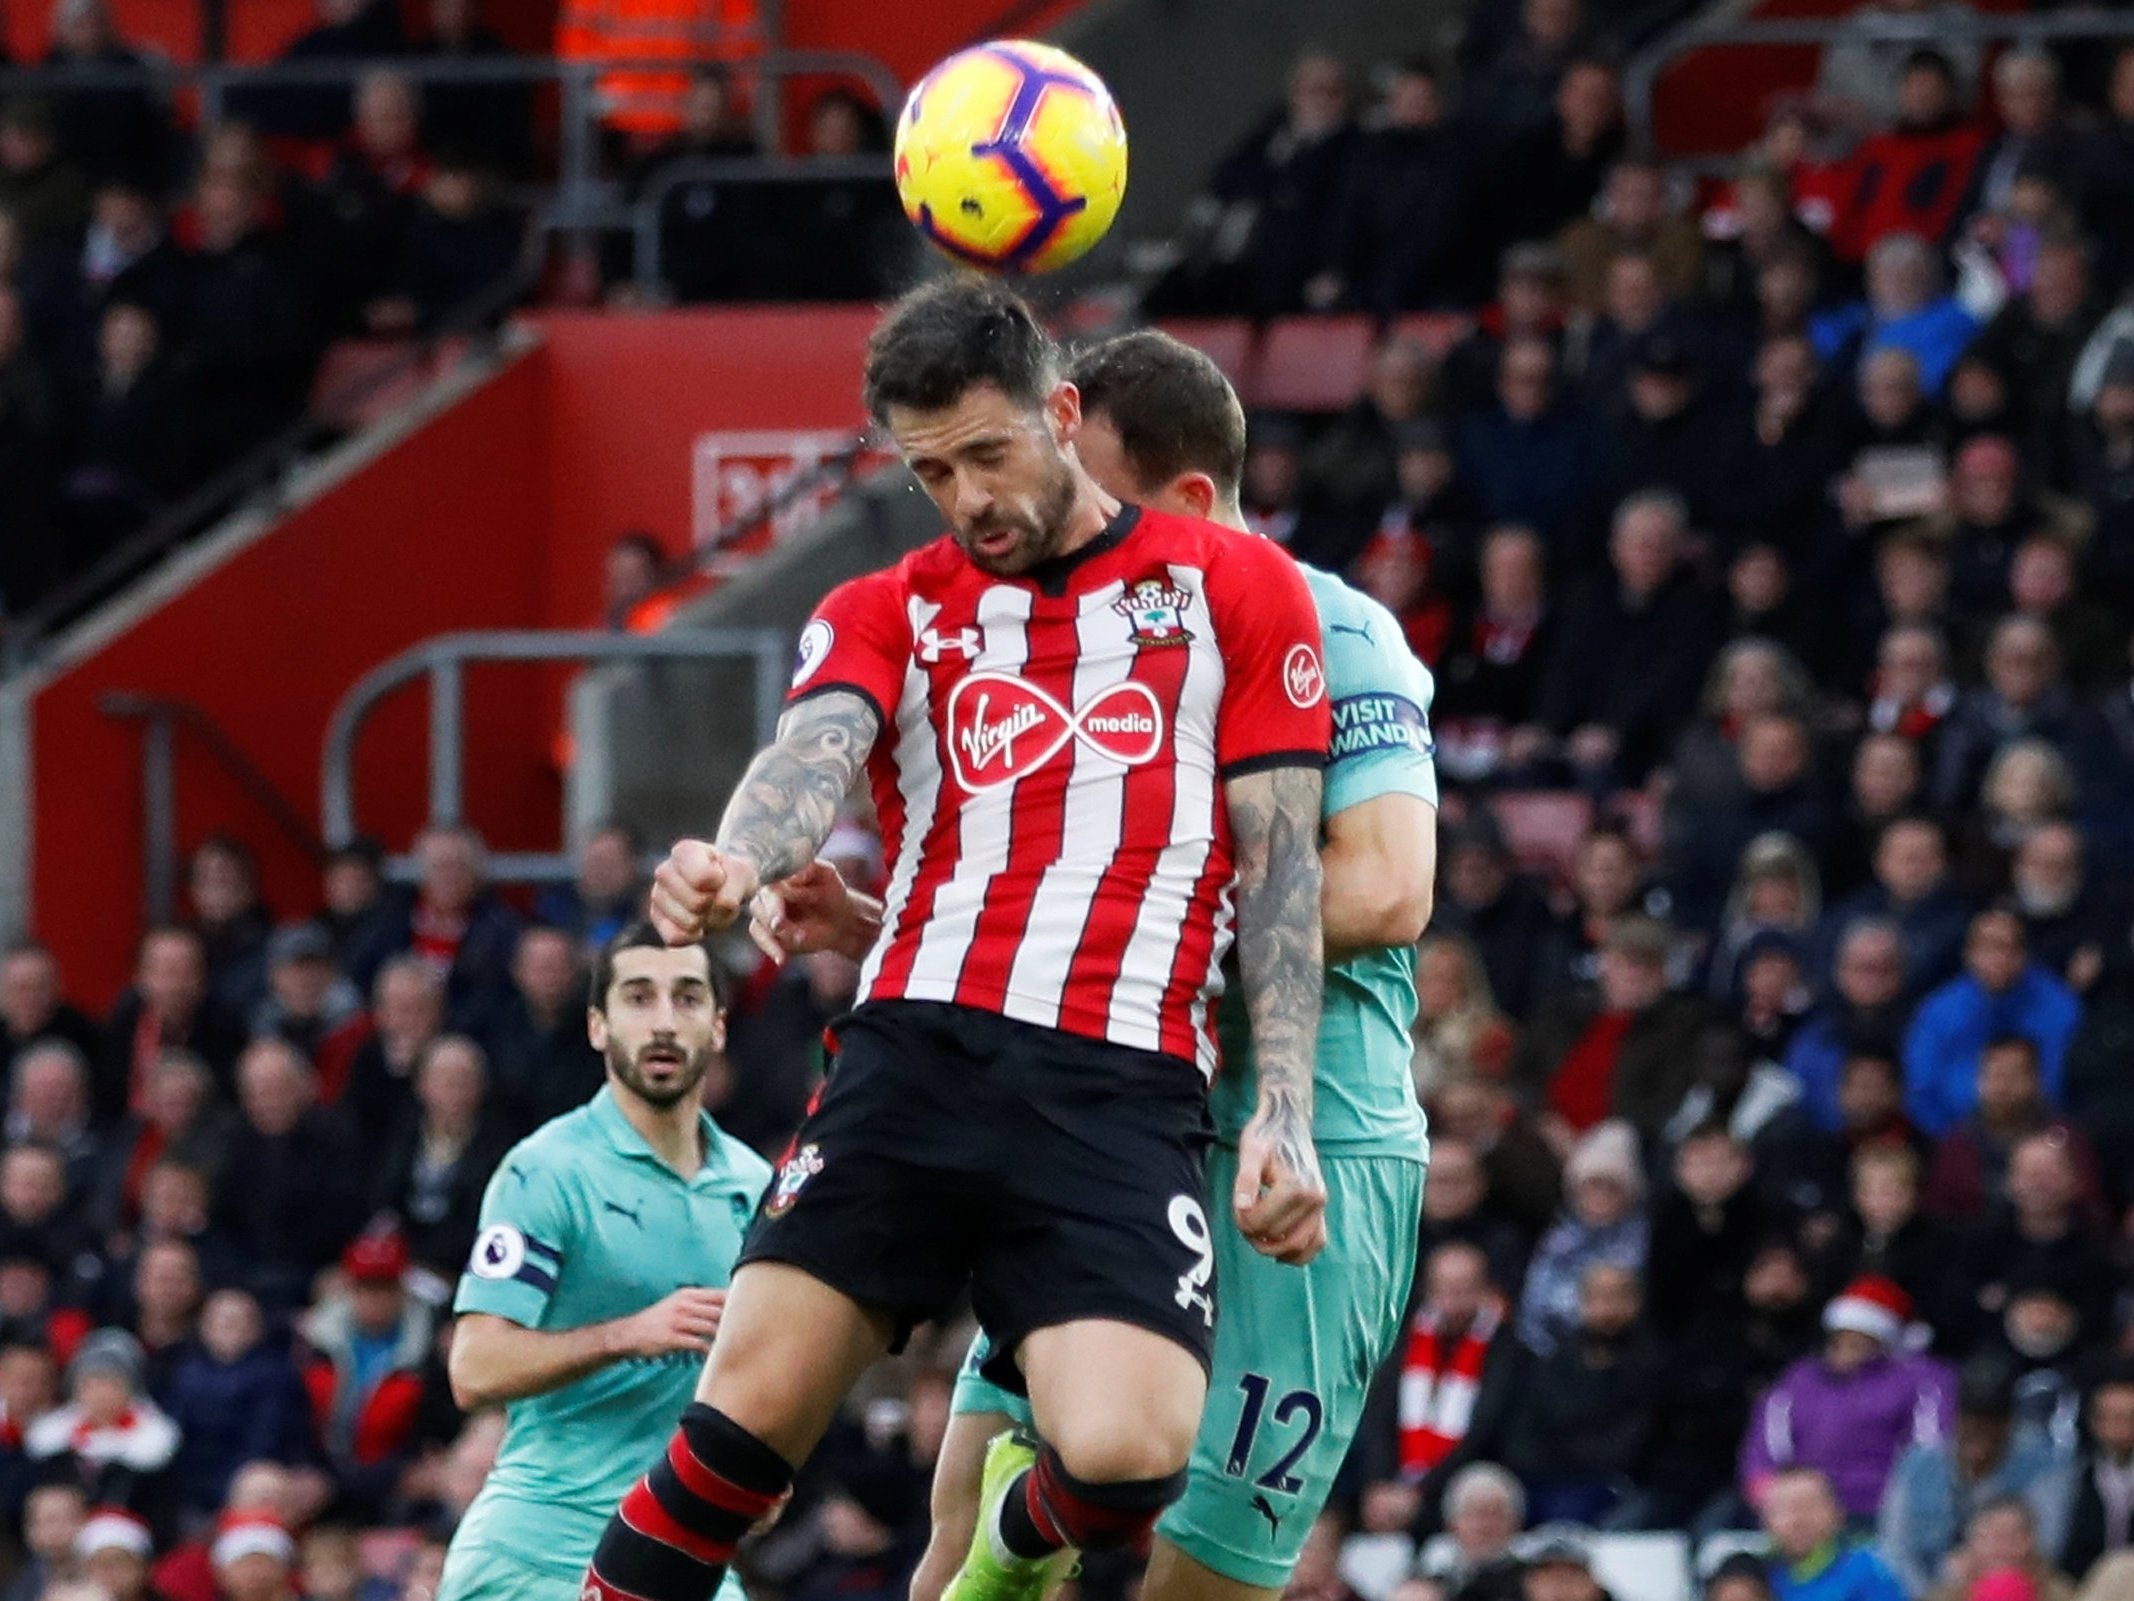 Danny Ings beats Stephen Lichtsteiner to head in Southampton's second